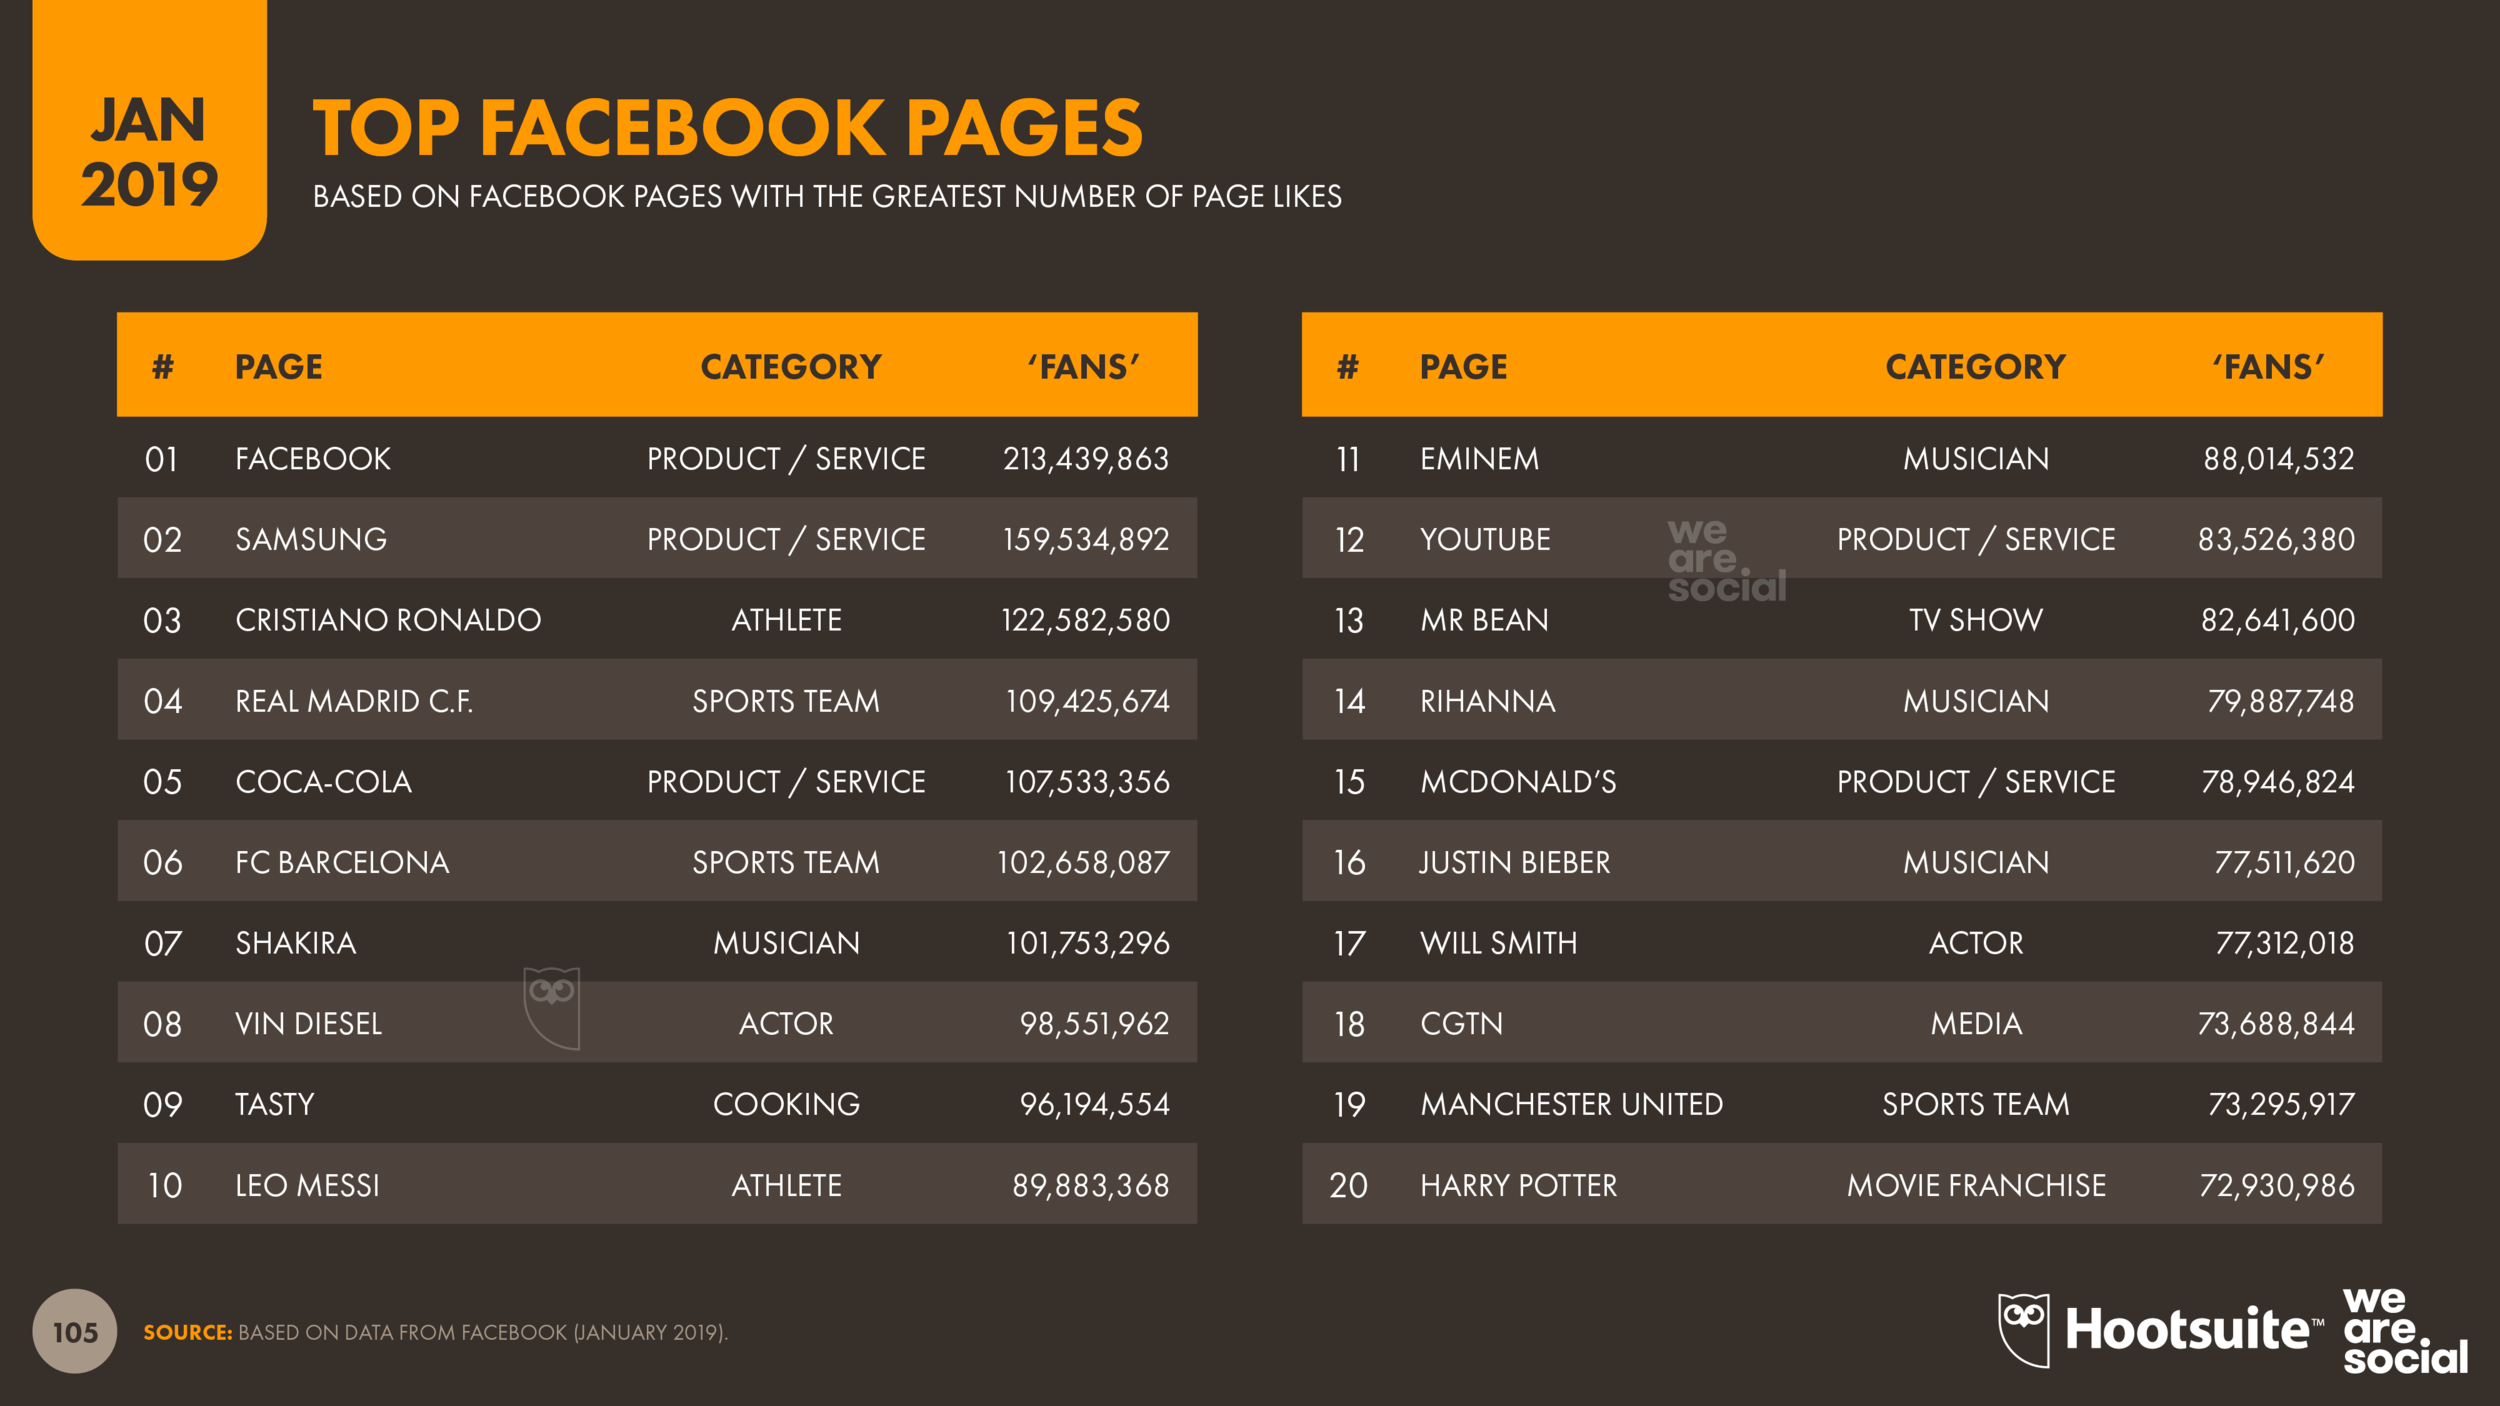 Top Facebook Pages January 2019 DataReportal